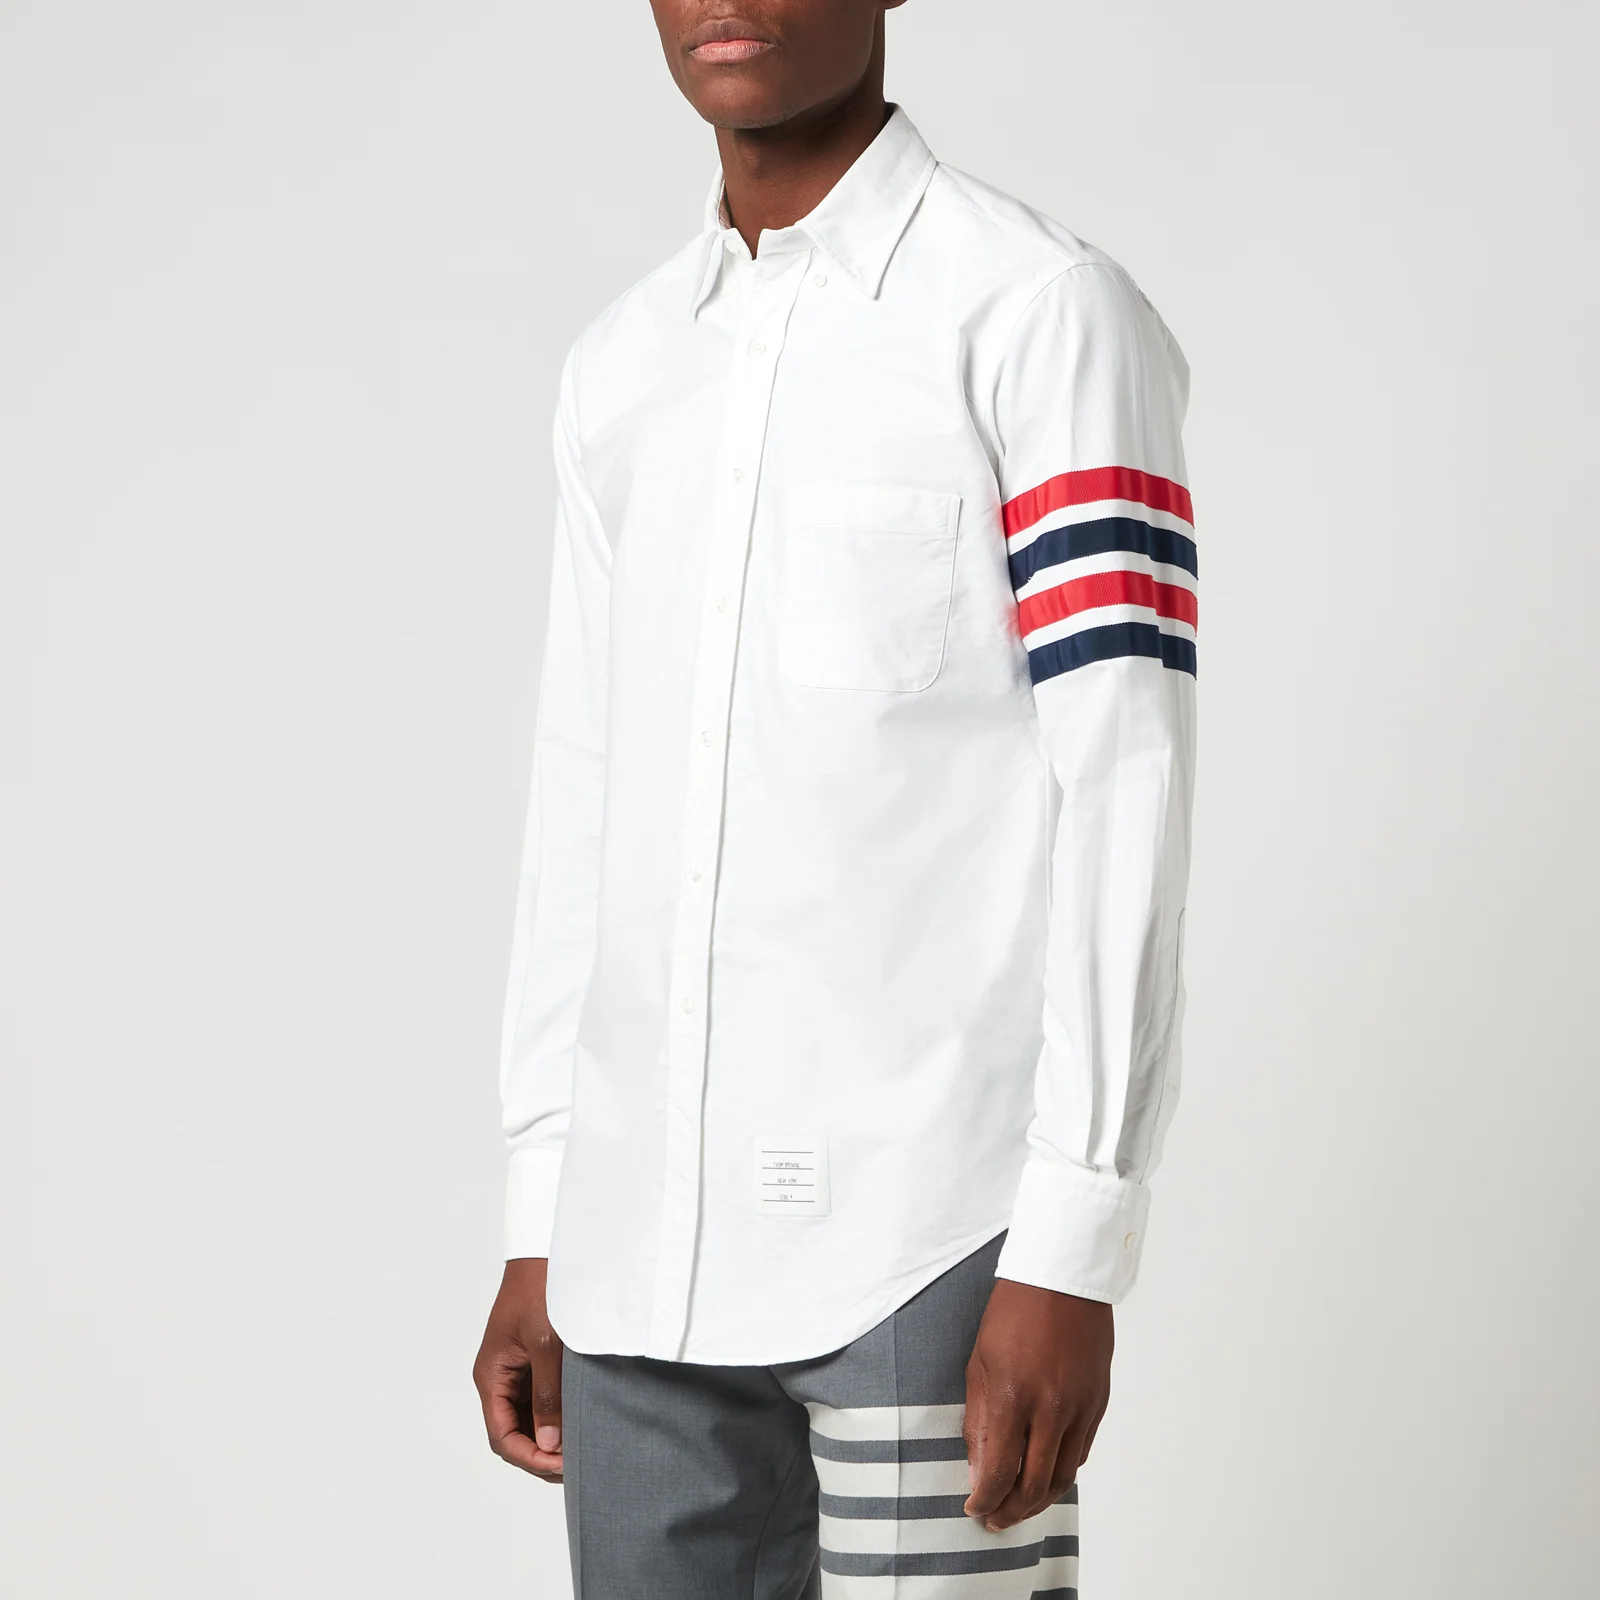 Thom Browne Men's Applied 4-Bar Classic Fit Oxford Shirt - White Image 1